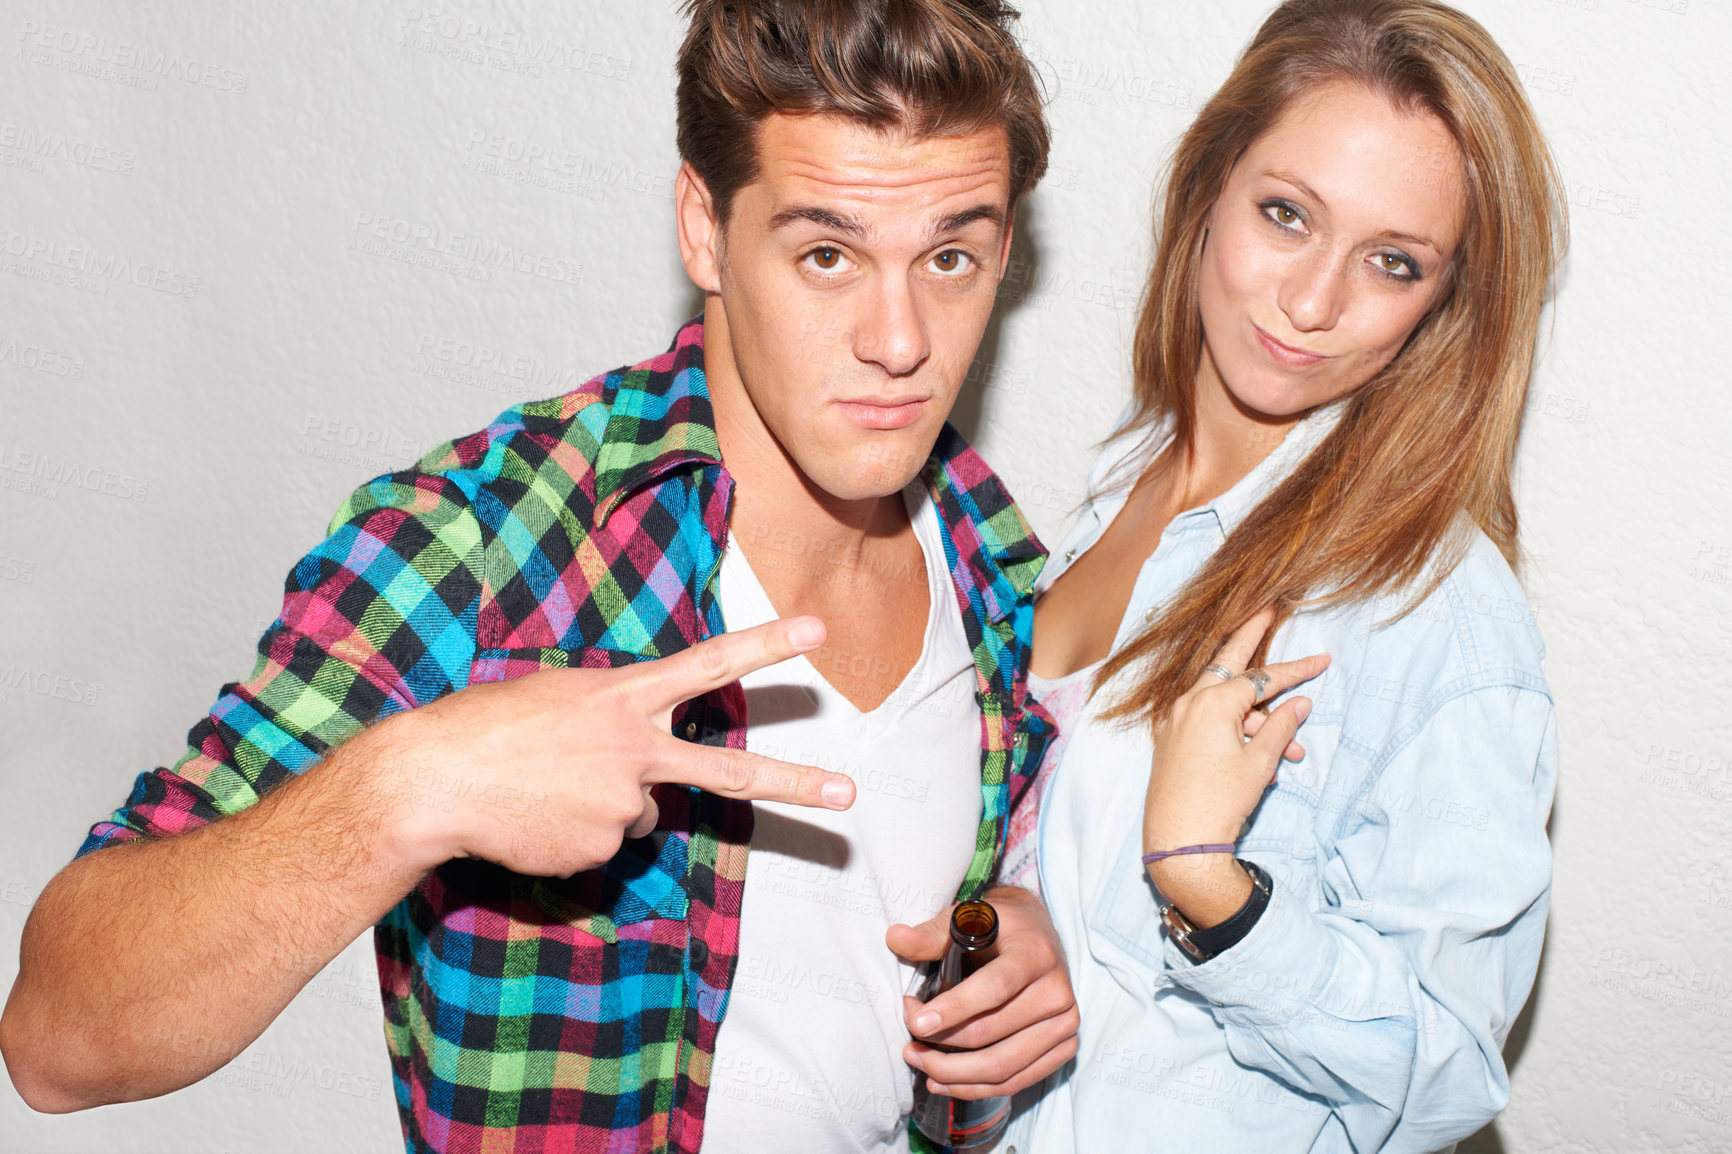 Buy stock photo Portrait of couple at party, peace sign and beer, gen z fashion and university drinking culture in youth. Happiness, woman and man at fun college event with drinks and smile on white wall background.